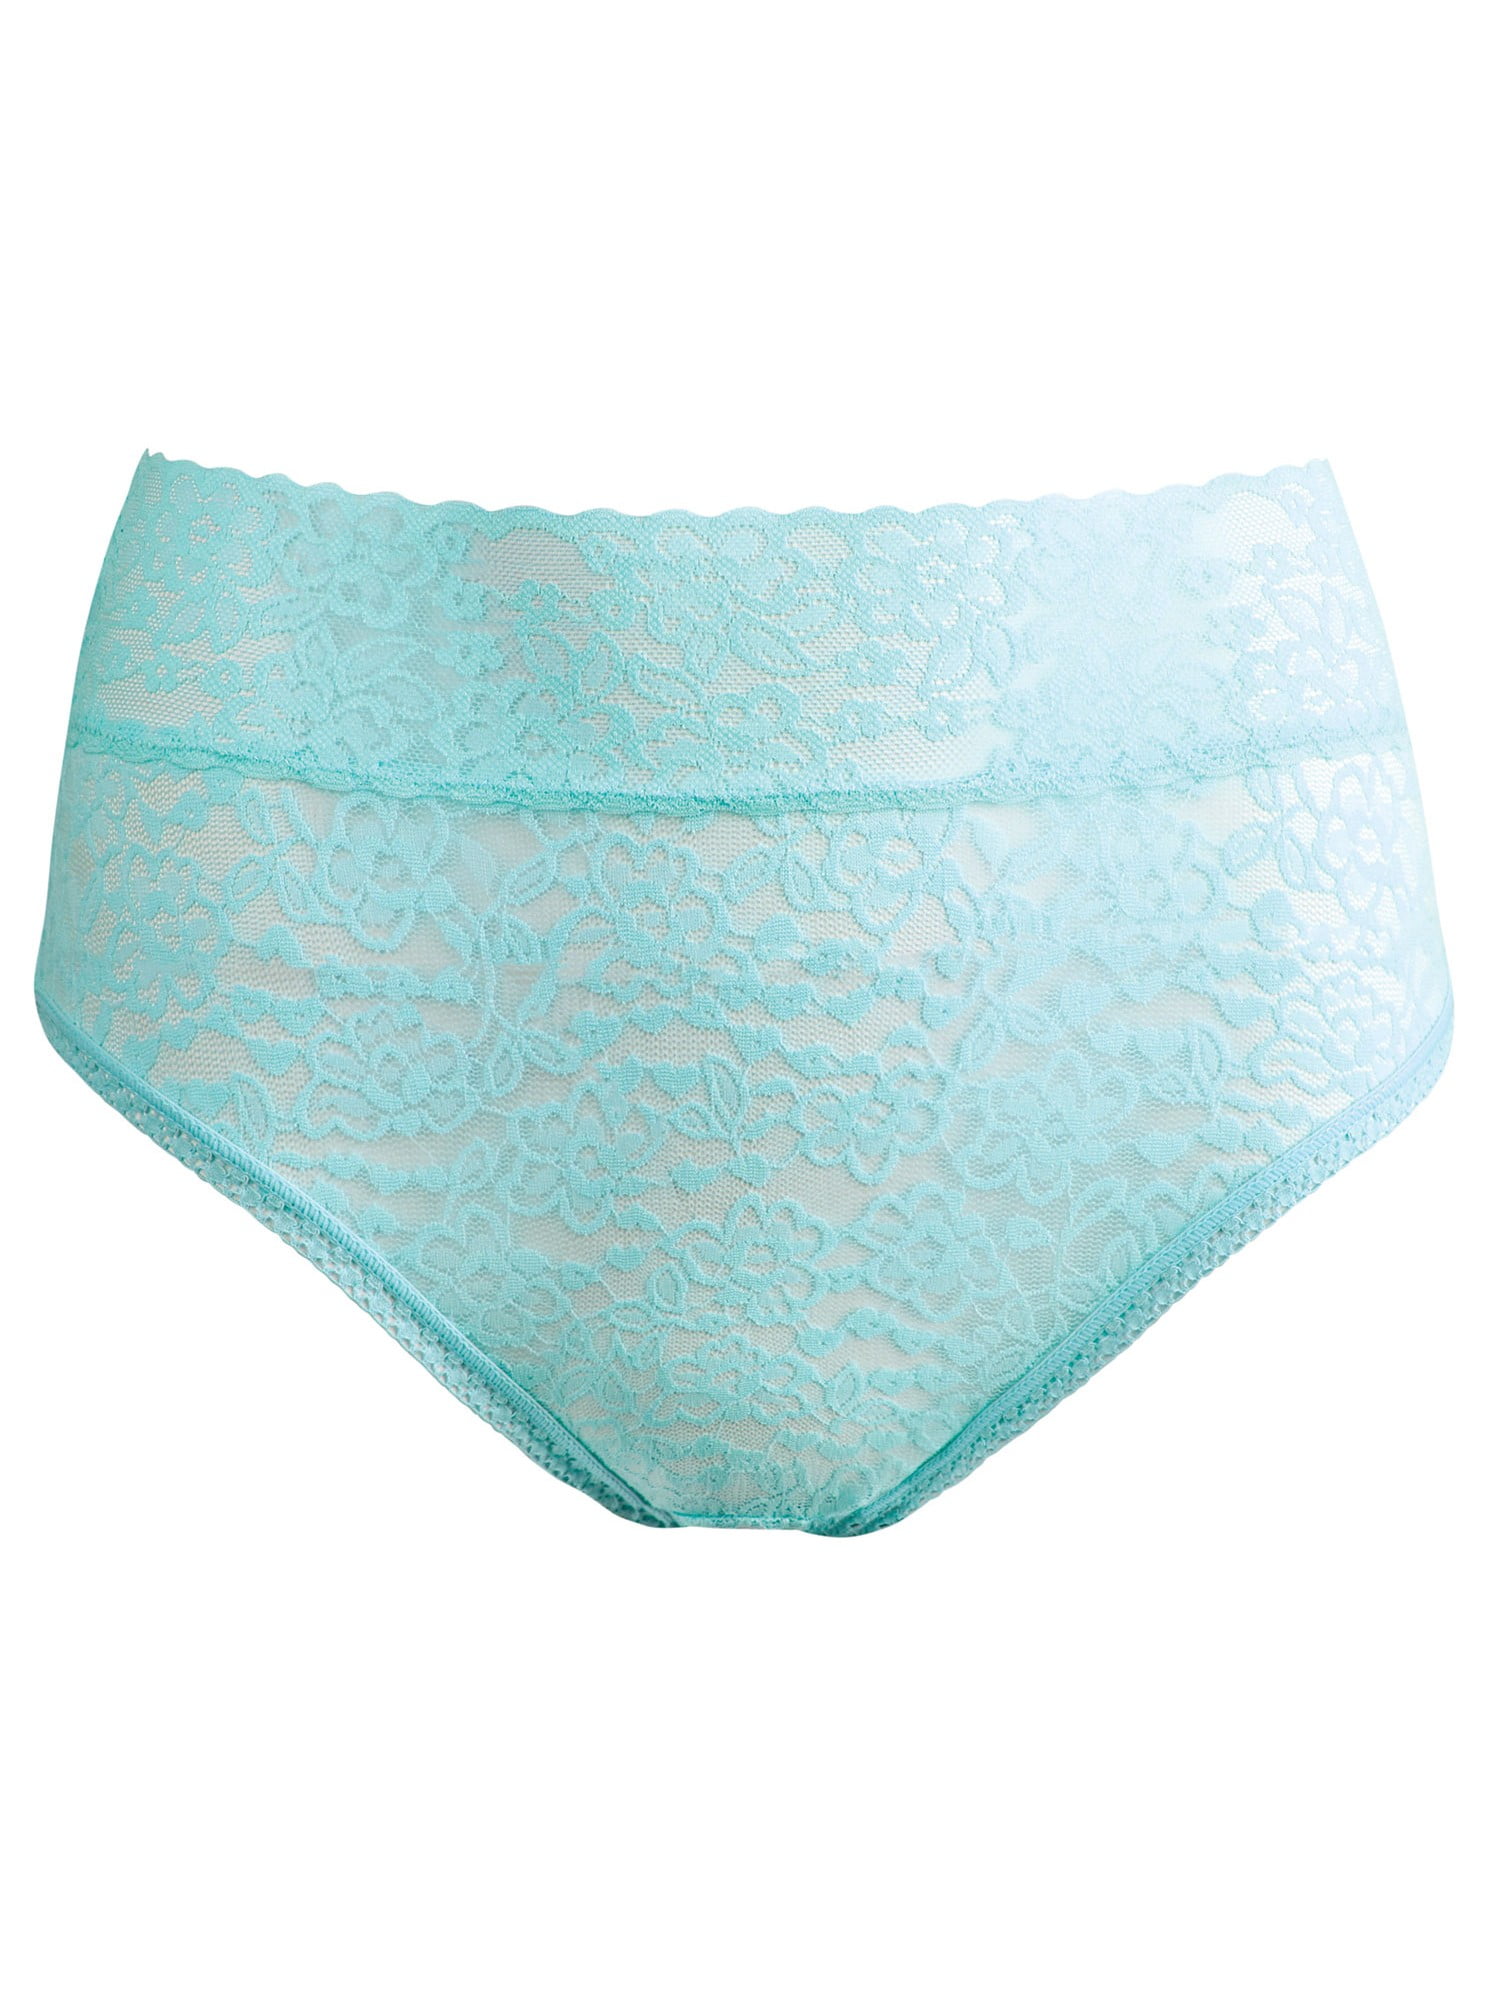 Ahh By Rhonda Shear Women's Lace Brief - 4-Way Stretch Full Coverage ...